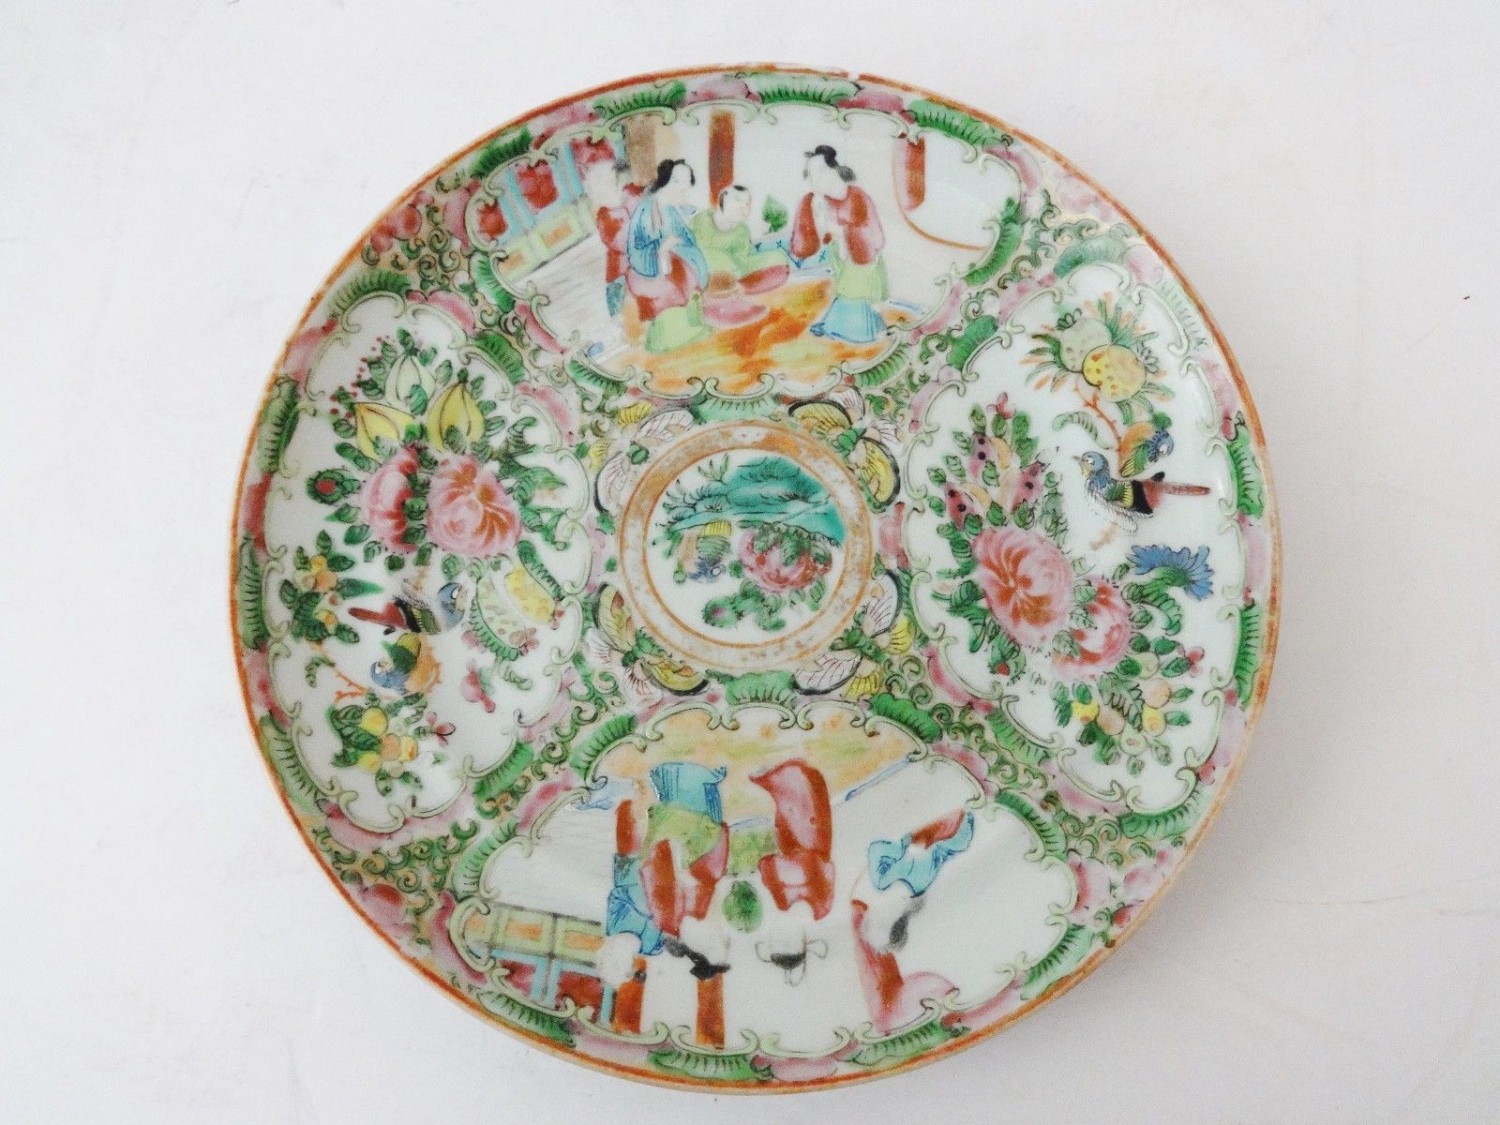 ANTIQUE CHINESE 19TH CENTURY EXPORT PORCELAIN PLATE